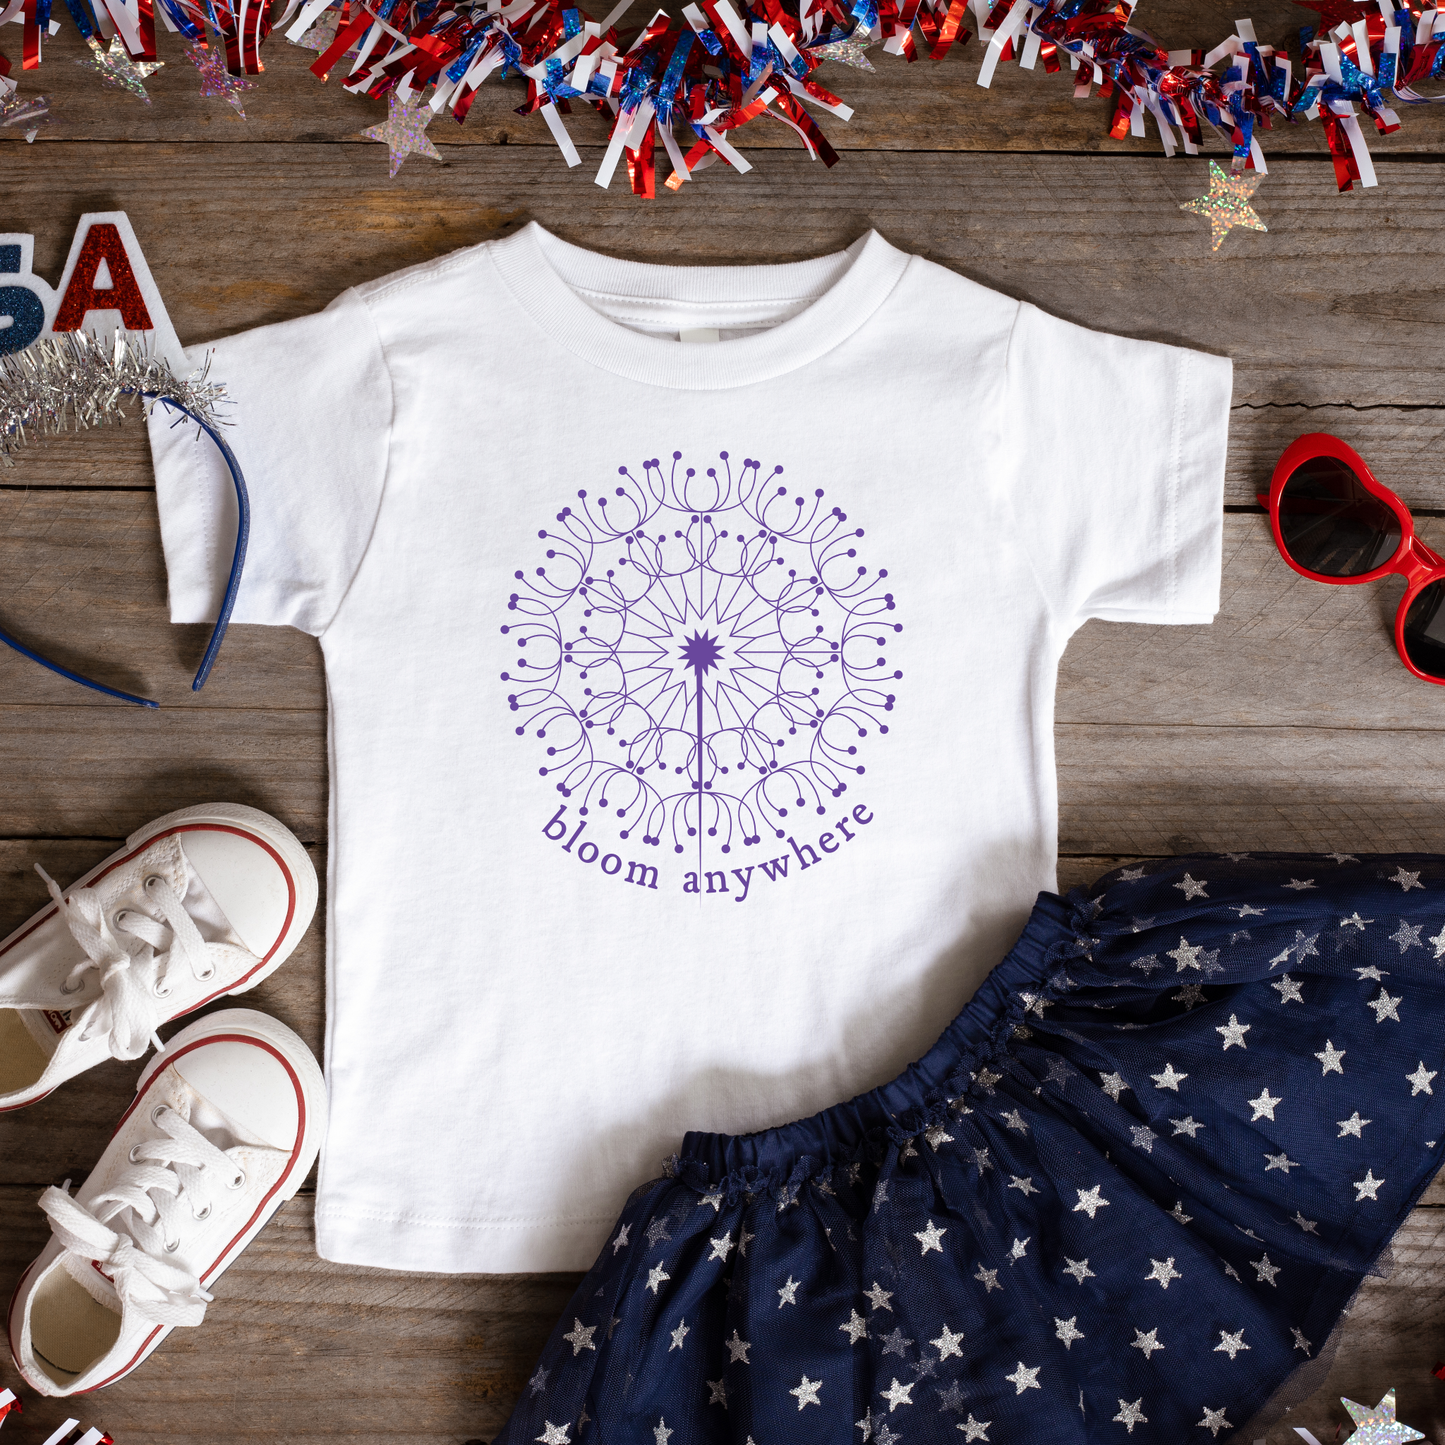 Bloom Anywhere - MOTMC - Toddler - Youth - Adult